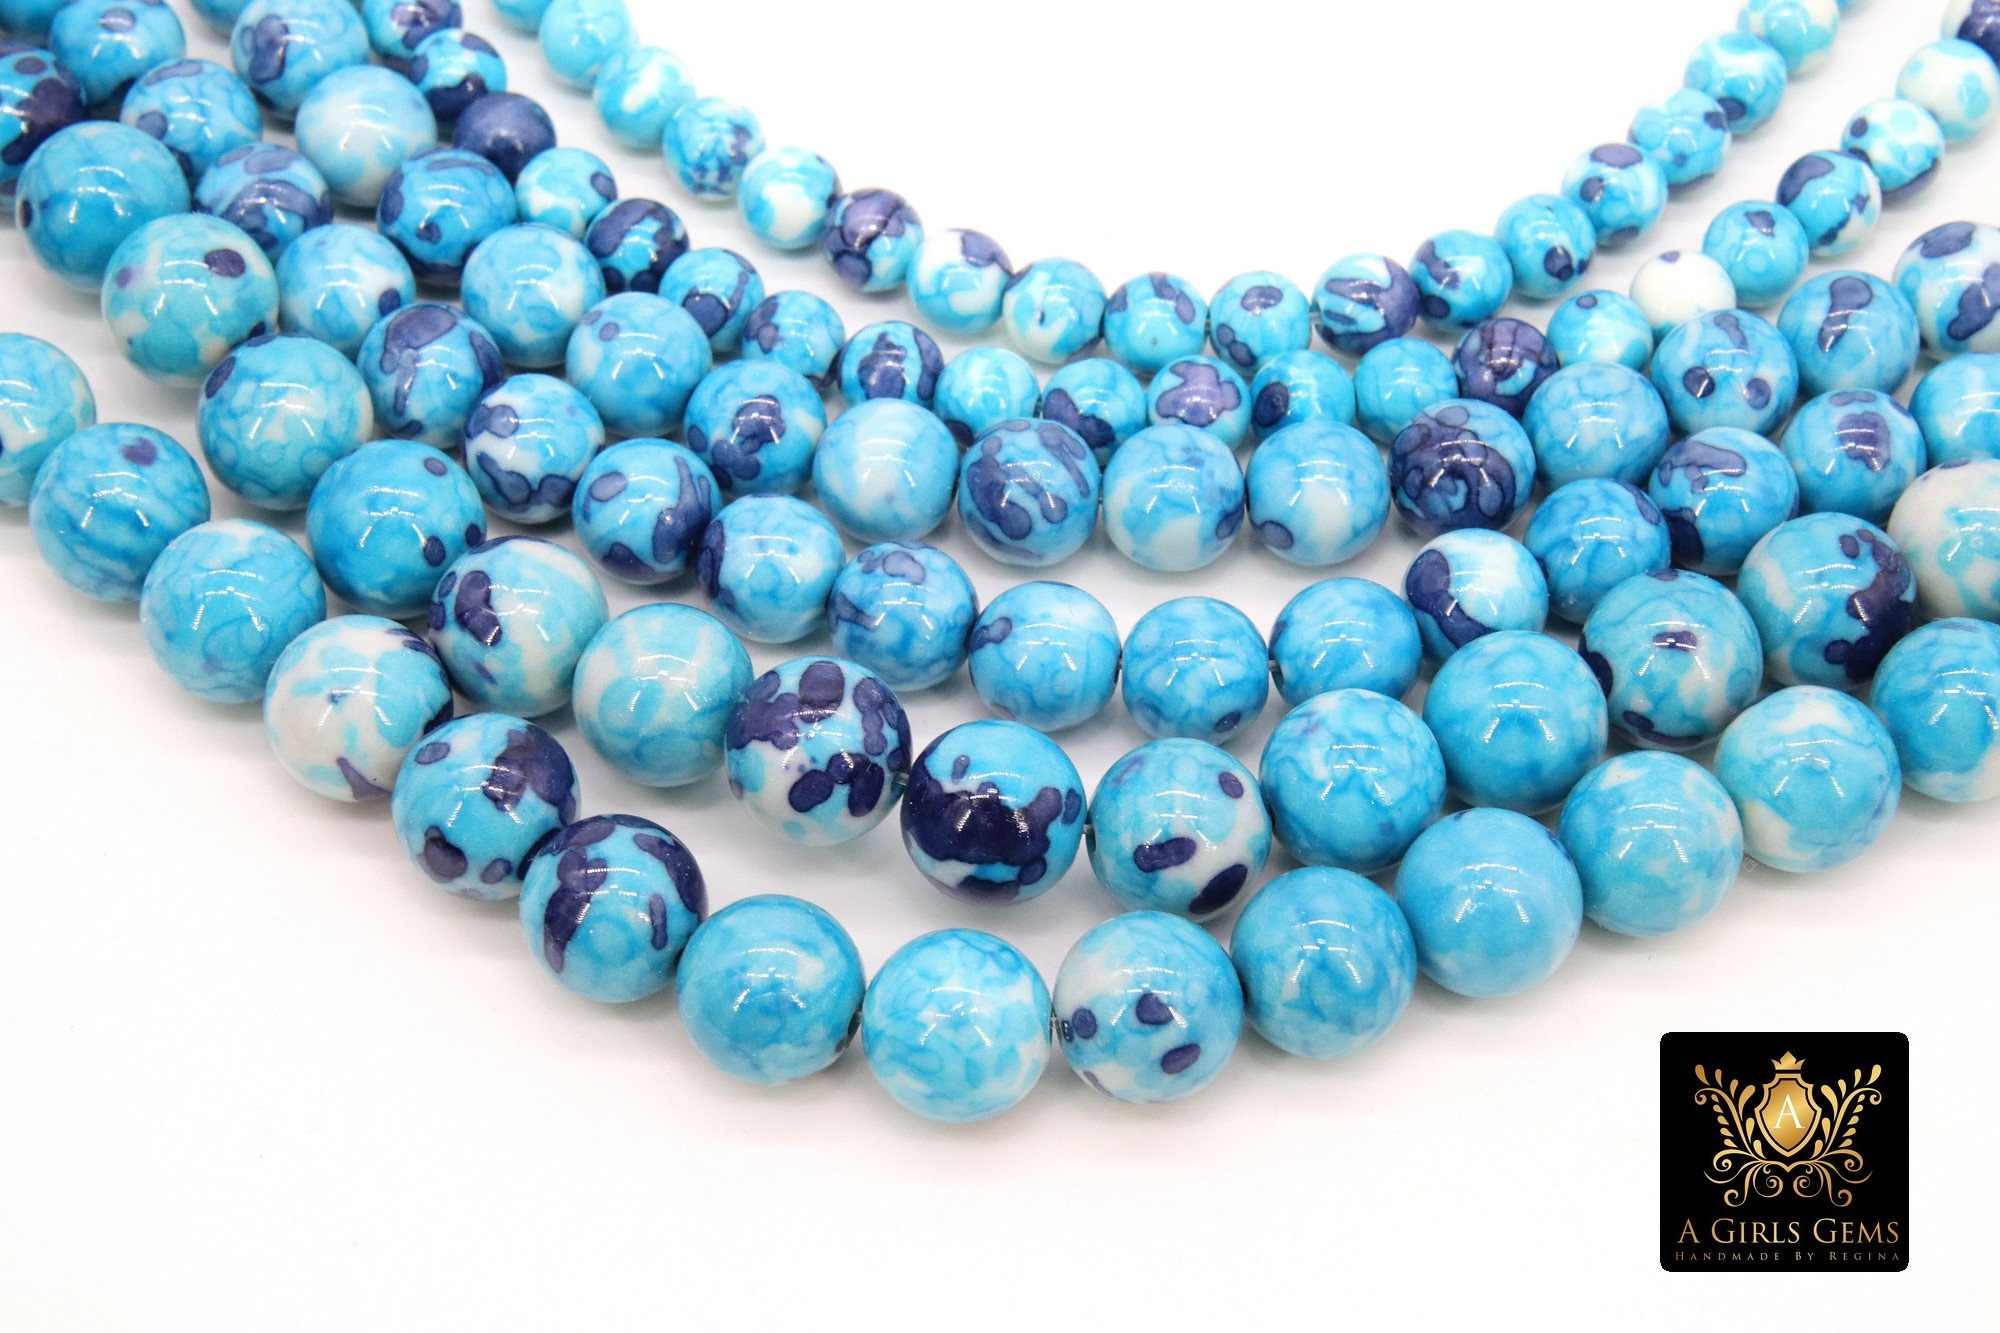 Smooth Round Ocean Blue Beads, Navy & White Jewelry Beads Bs #101, Sizes in 6mm 8 10 15.5 Inch Strands